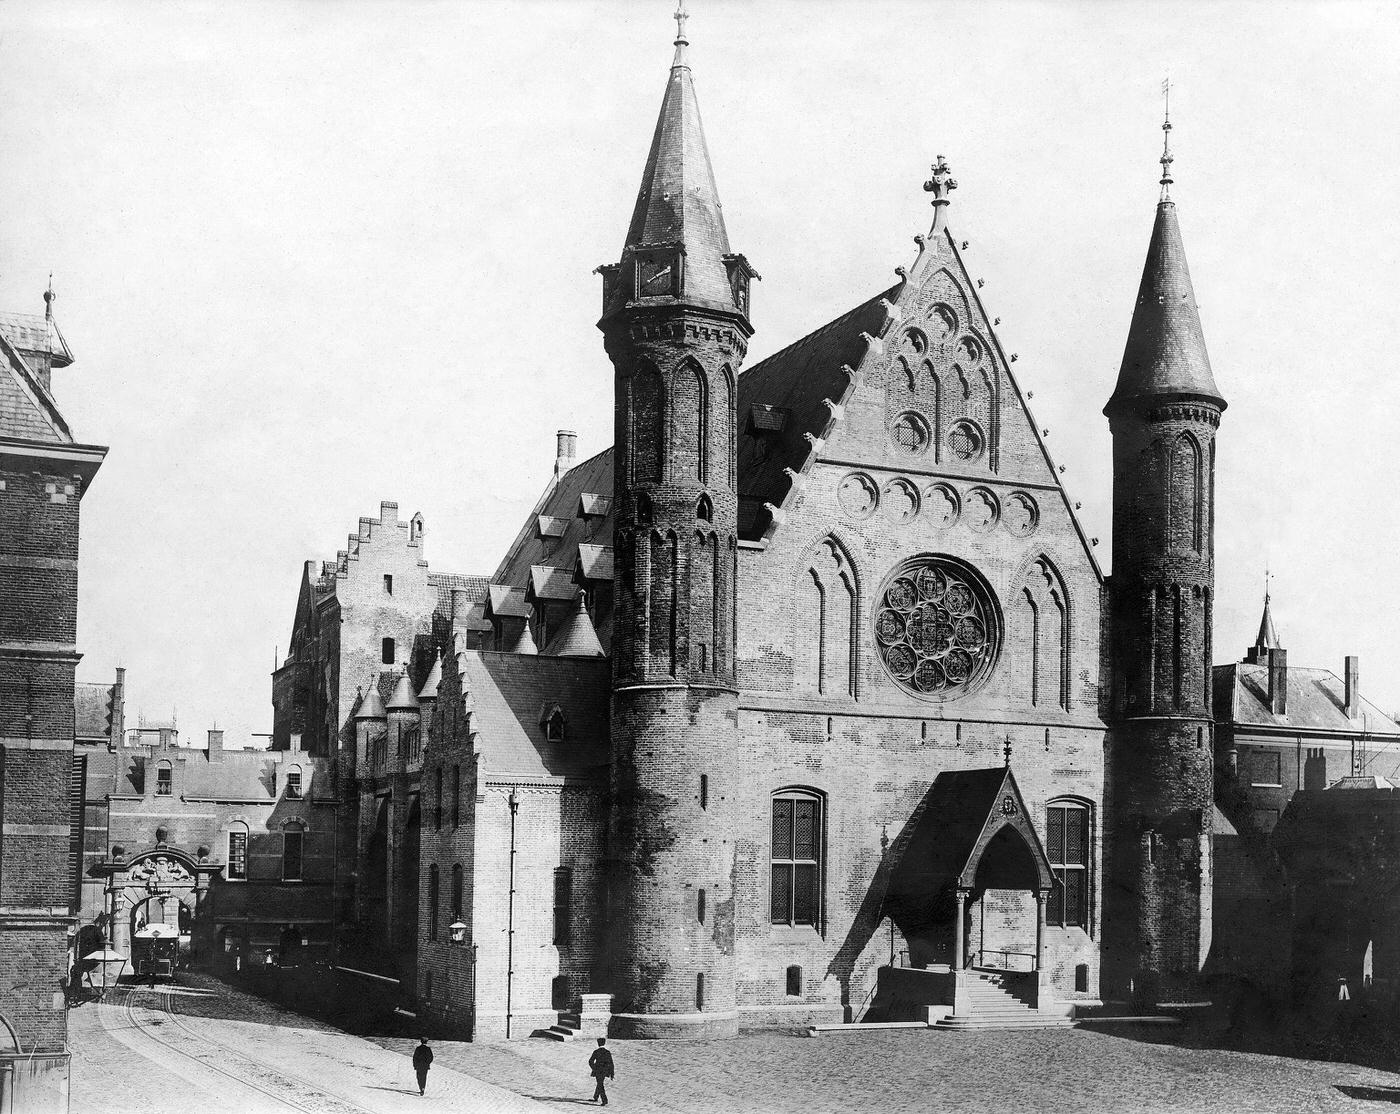 Knights' Hall, a Gothic building in The Hague, Netherlands, 1907